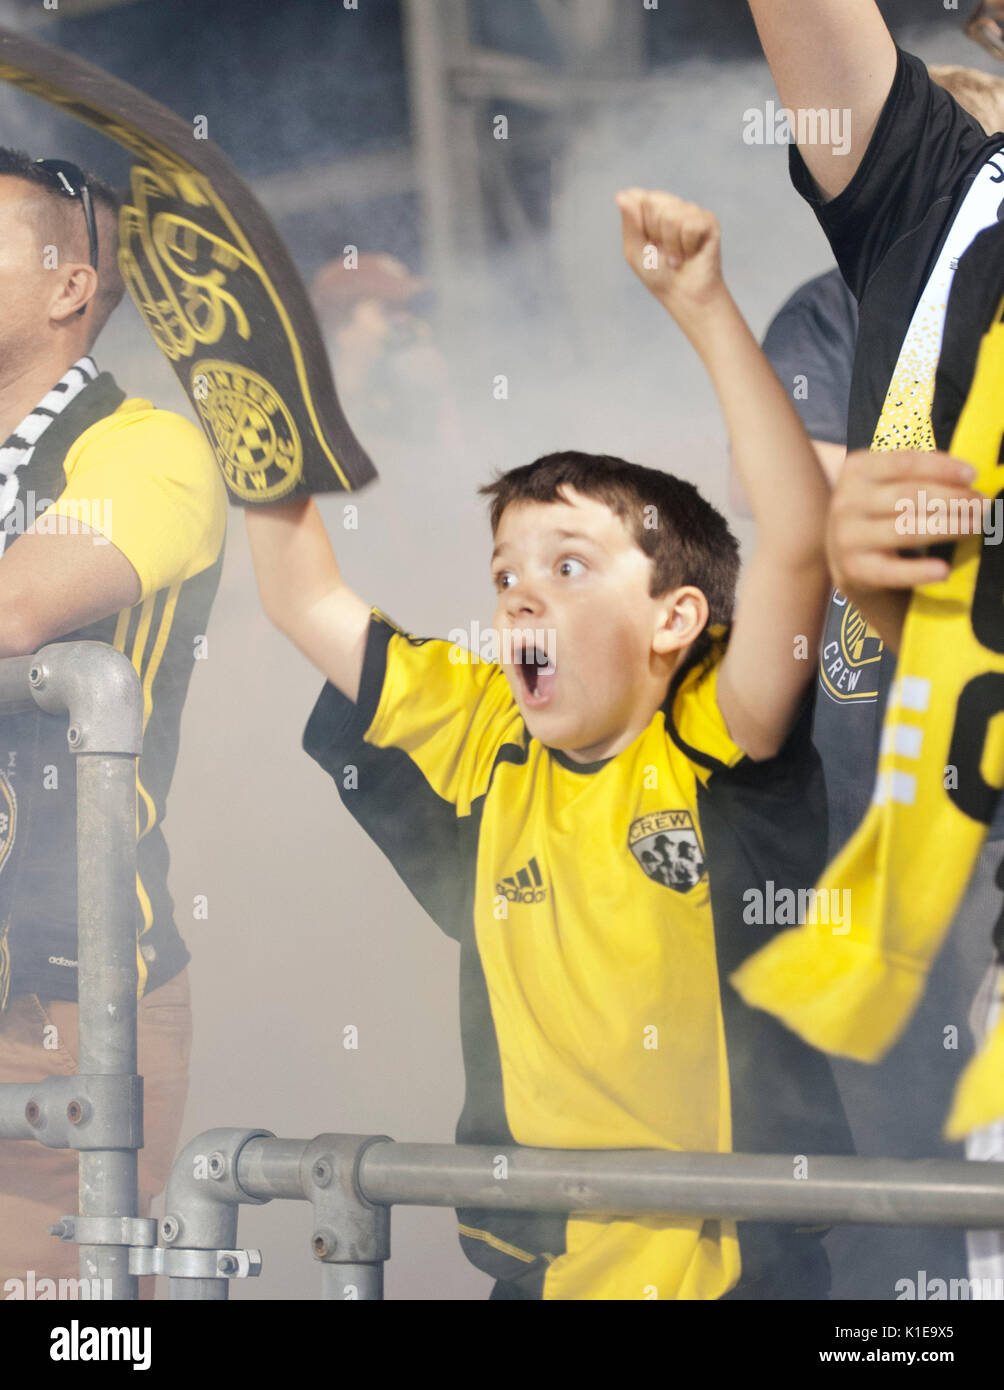 Columbus, U.S.A. 26th Aug, 2017. August 26, 2017: A young Columbus crew SC fan cheers after Columbus Crew defender Jonathan Mensah (4) makes it 2-0 Columbus against Dallas in their game at Mapfre Stadium. Columbus, Ohio, USA. Credit: Brent Clark/Alamy Live News Stock Photo